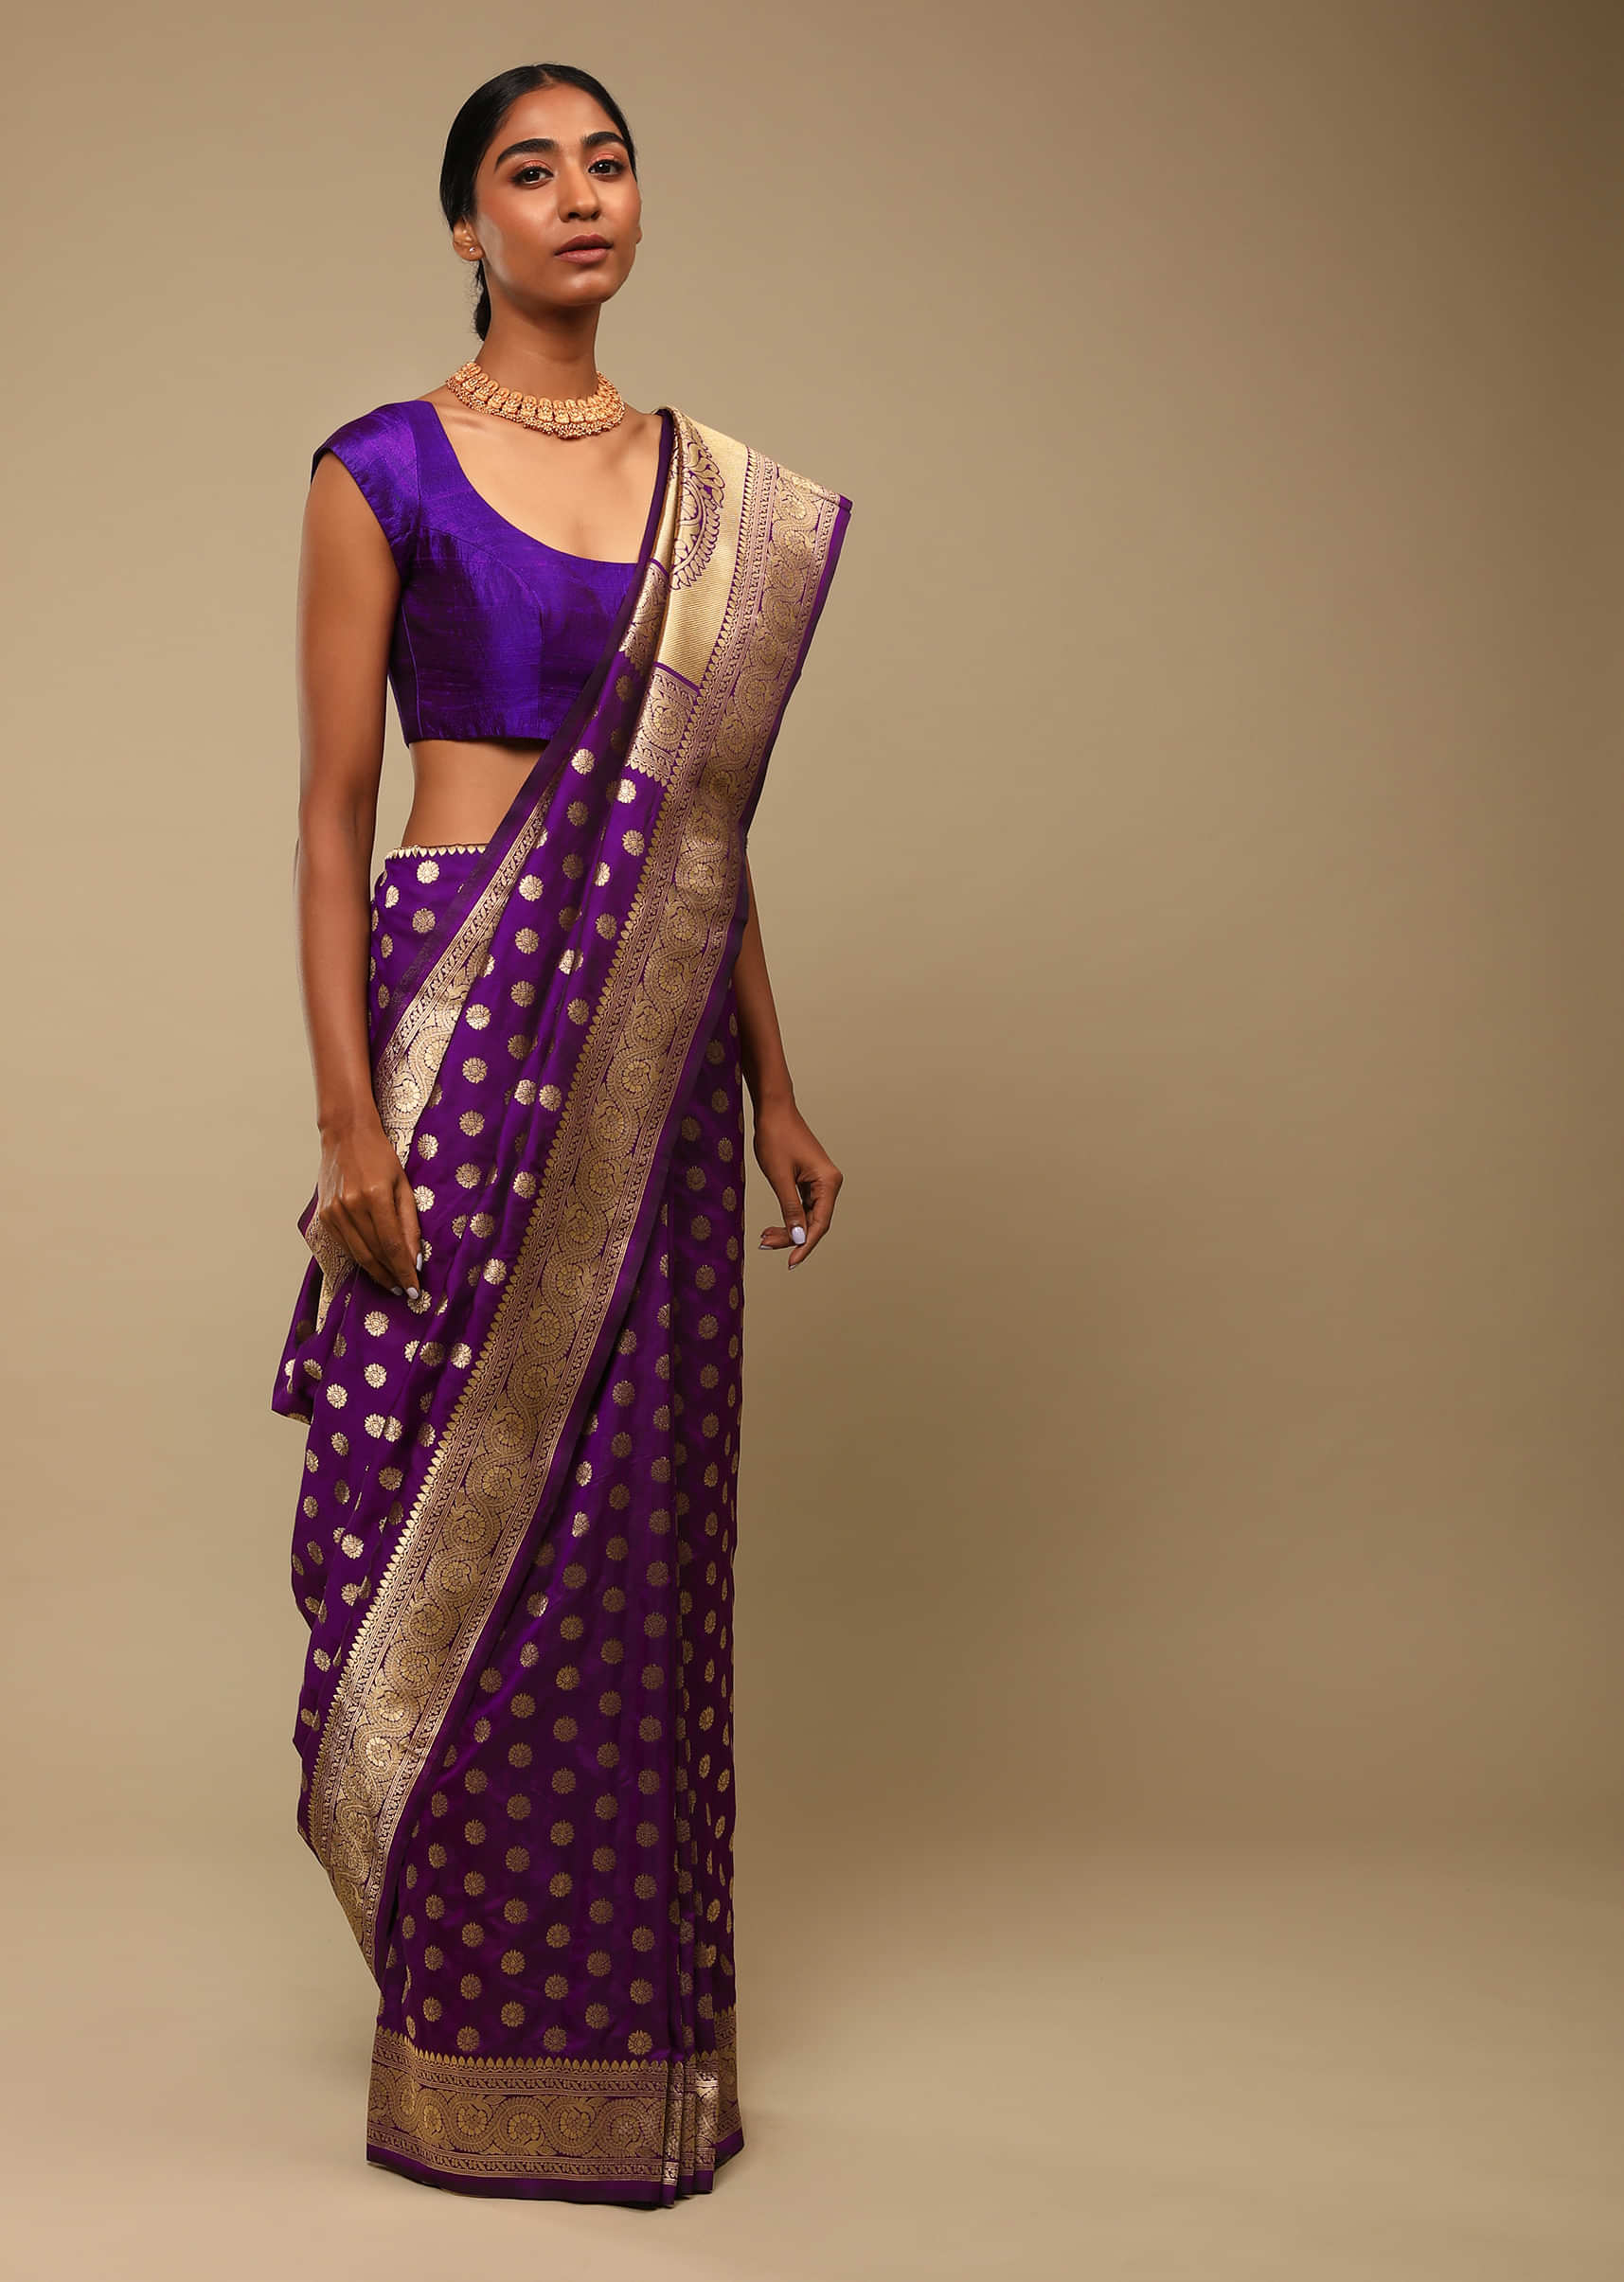 Grape Purple Saree In Art Handloom Silk With Woven Floral Buttis, Paisley Motifs On The Pallu And Unstitched Blouse  